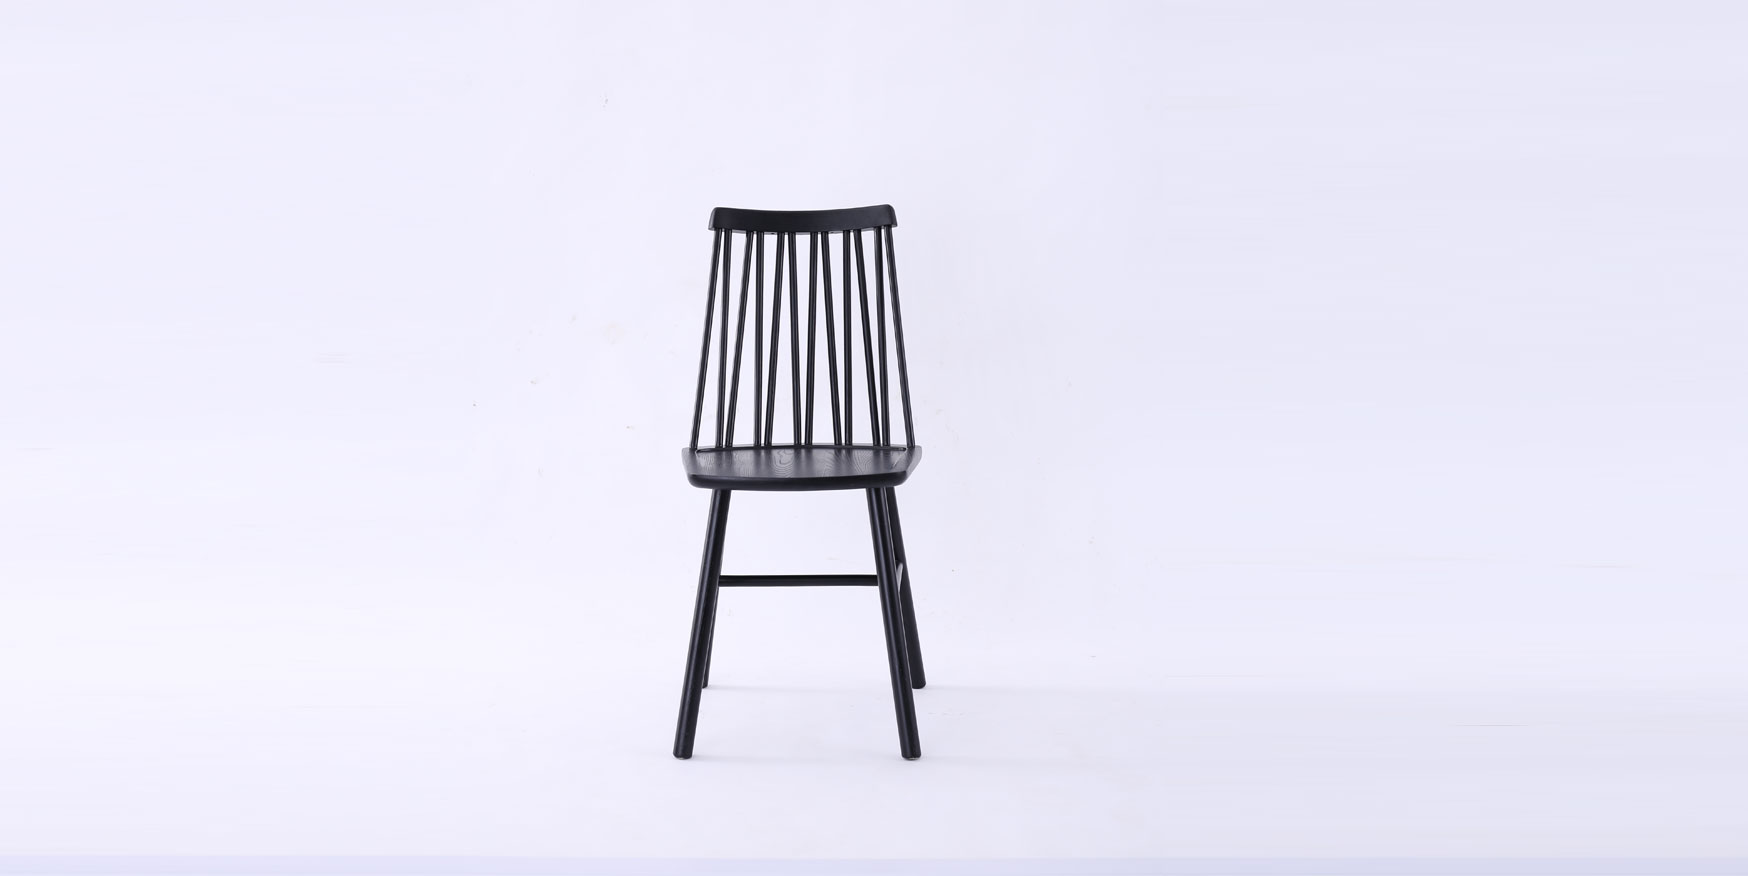 bent plywood dining chair
